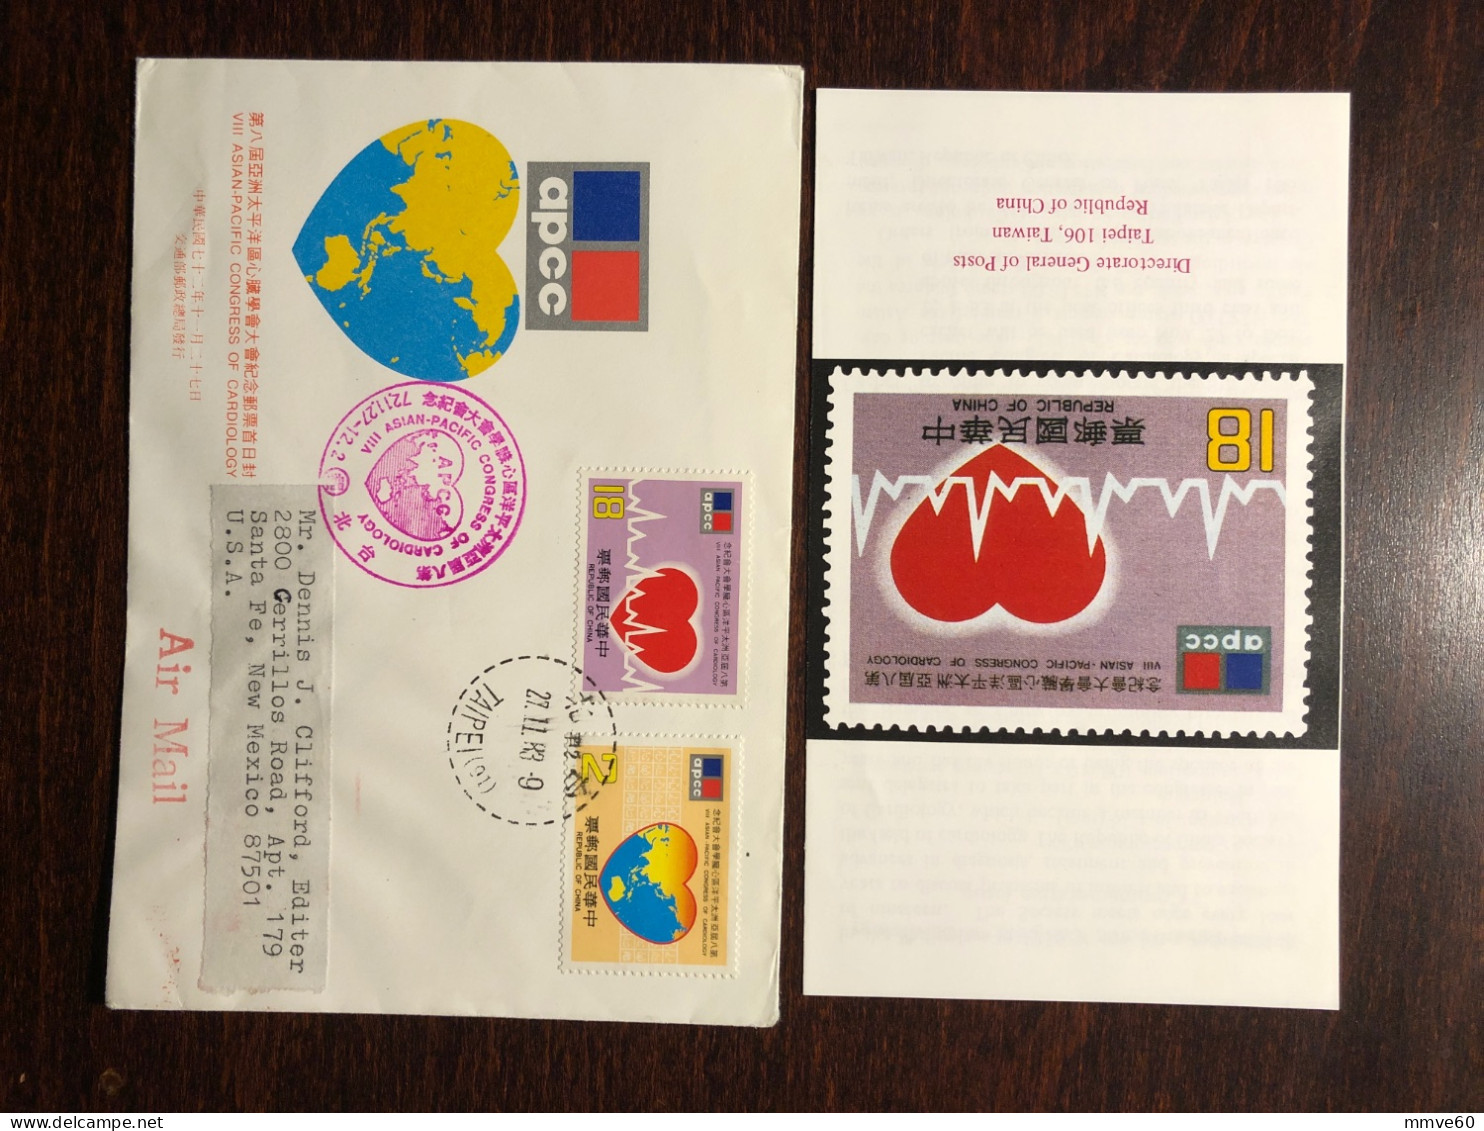 TAIWAN ROC FDC COVER 1983 YEAR HEART CARDIOLOGY HEALTH MEDICINE STAMPS - FDC